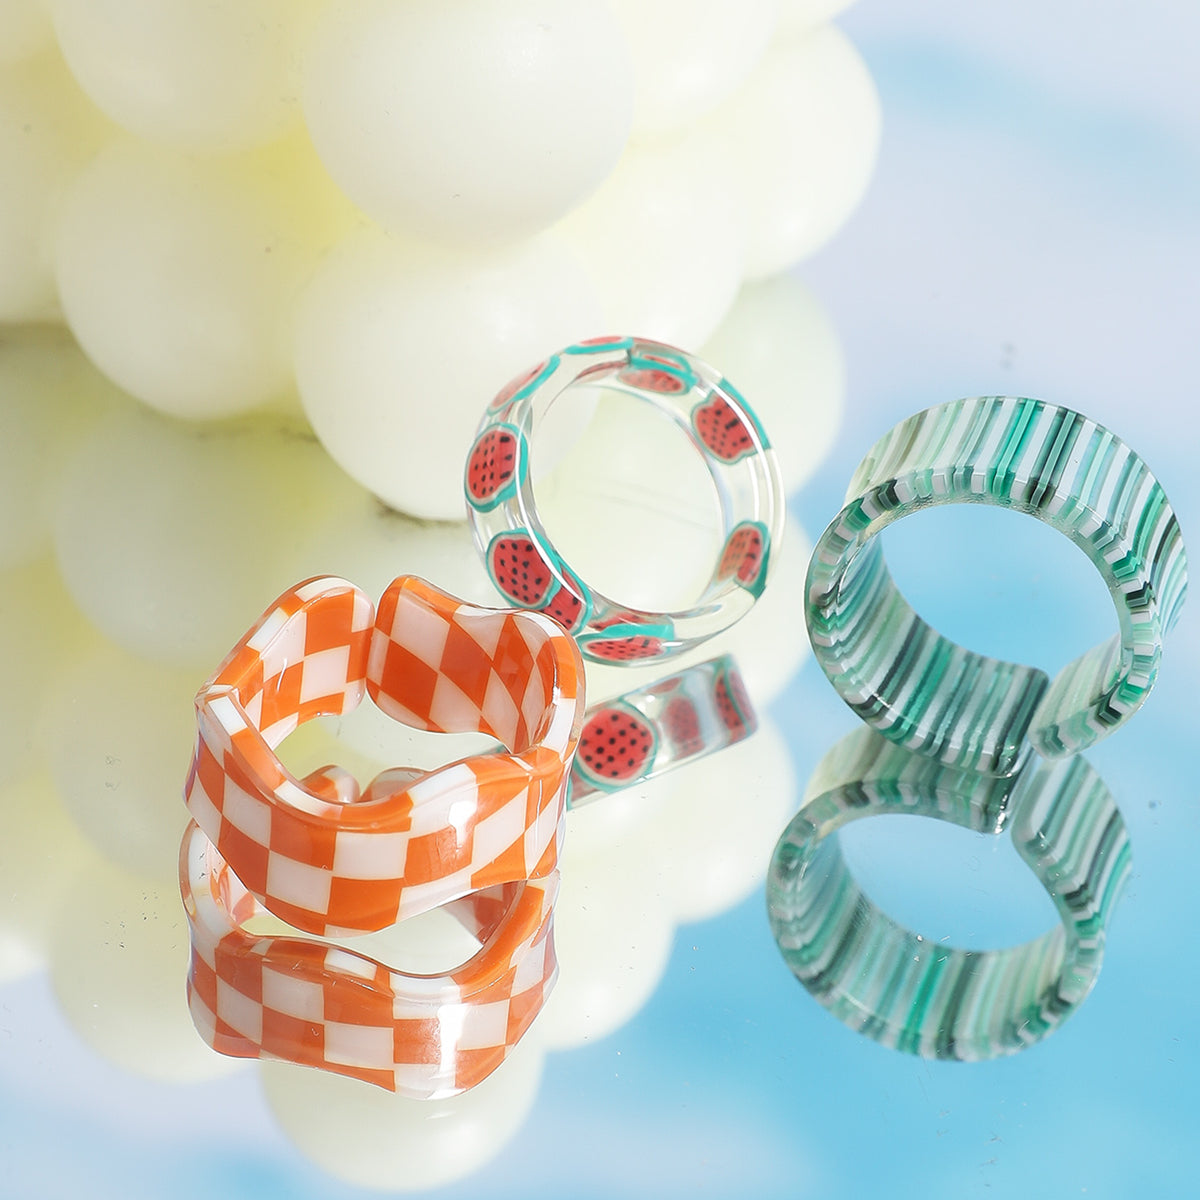 New Checkerboard Resin Ring Three-piece Set Wholesale